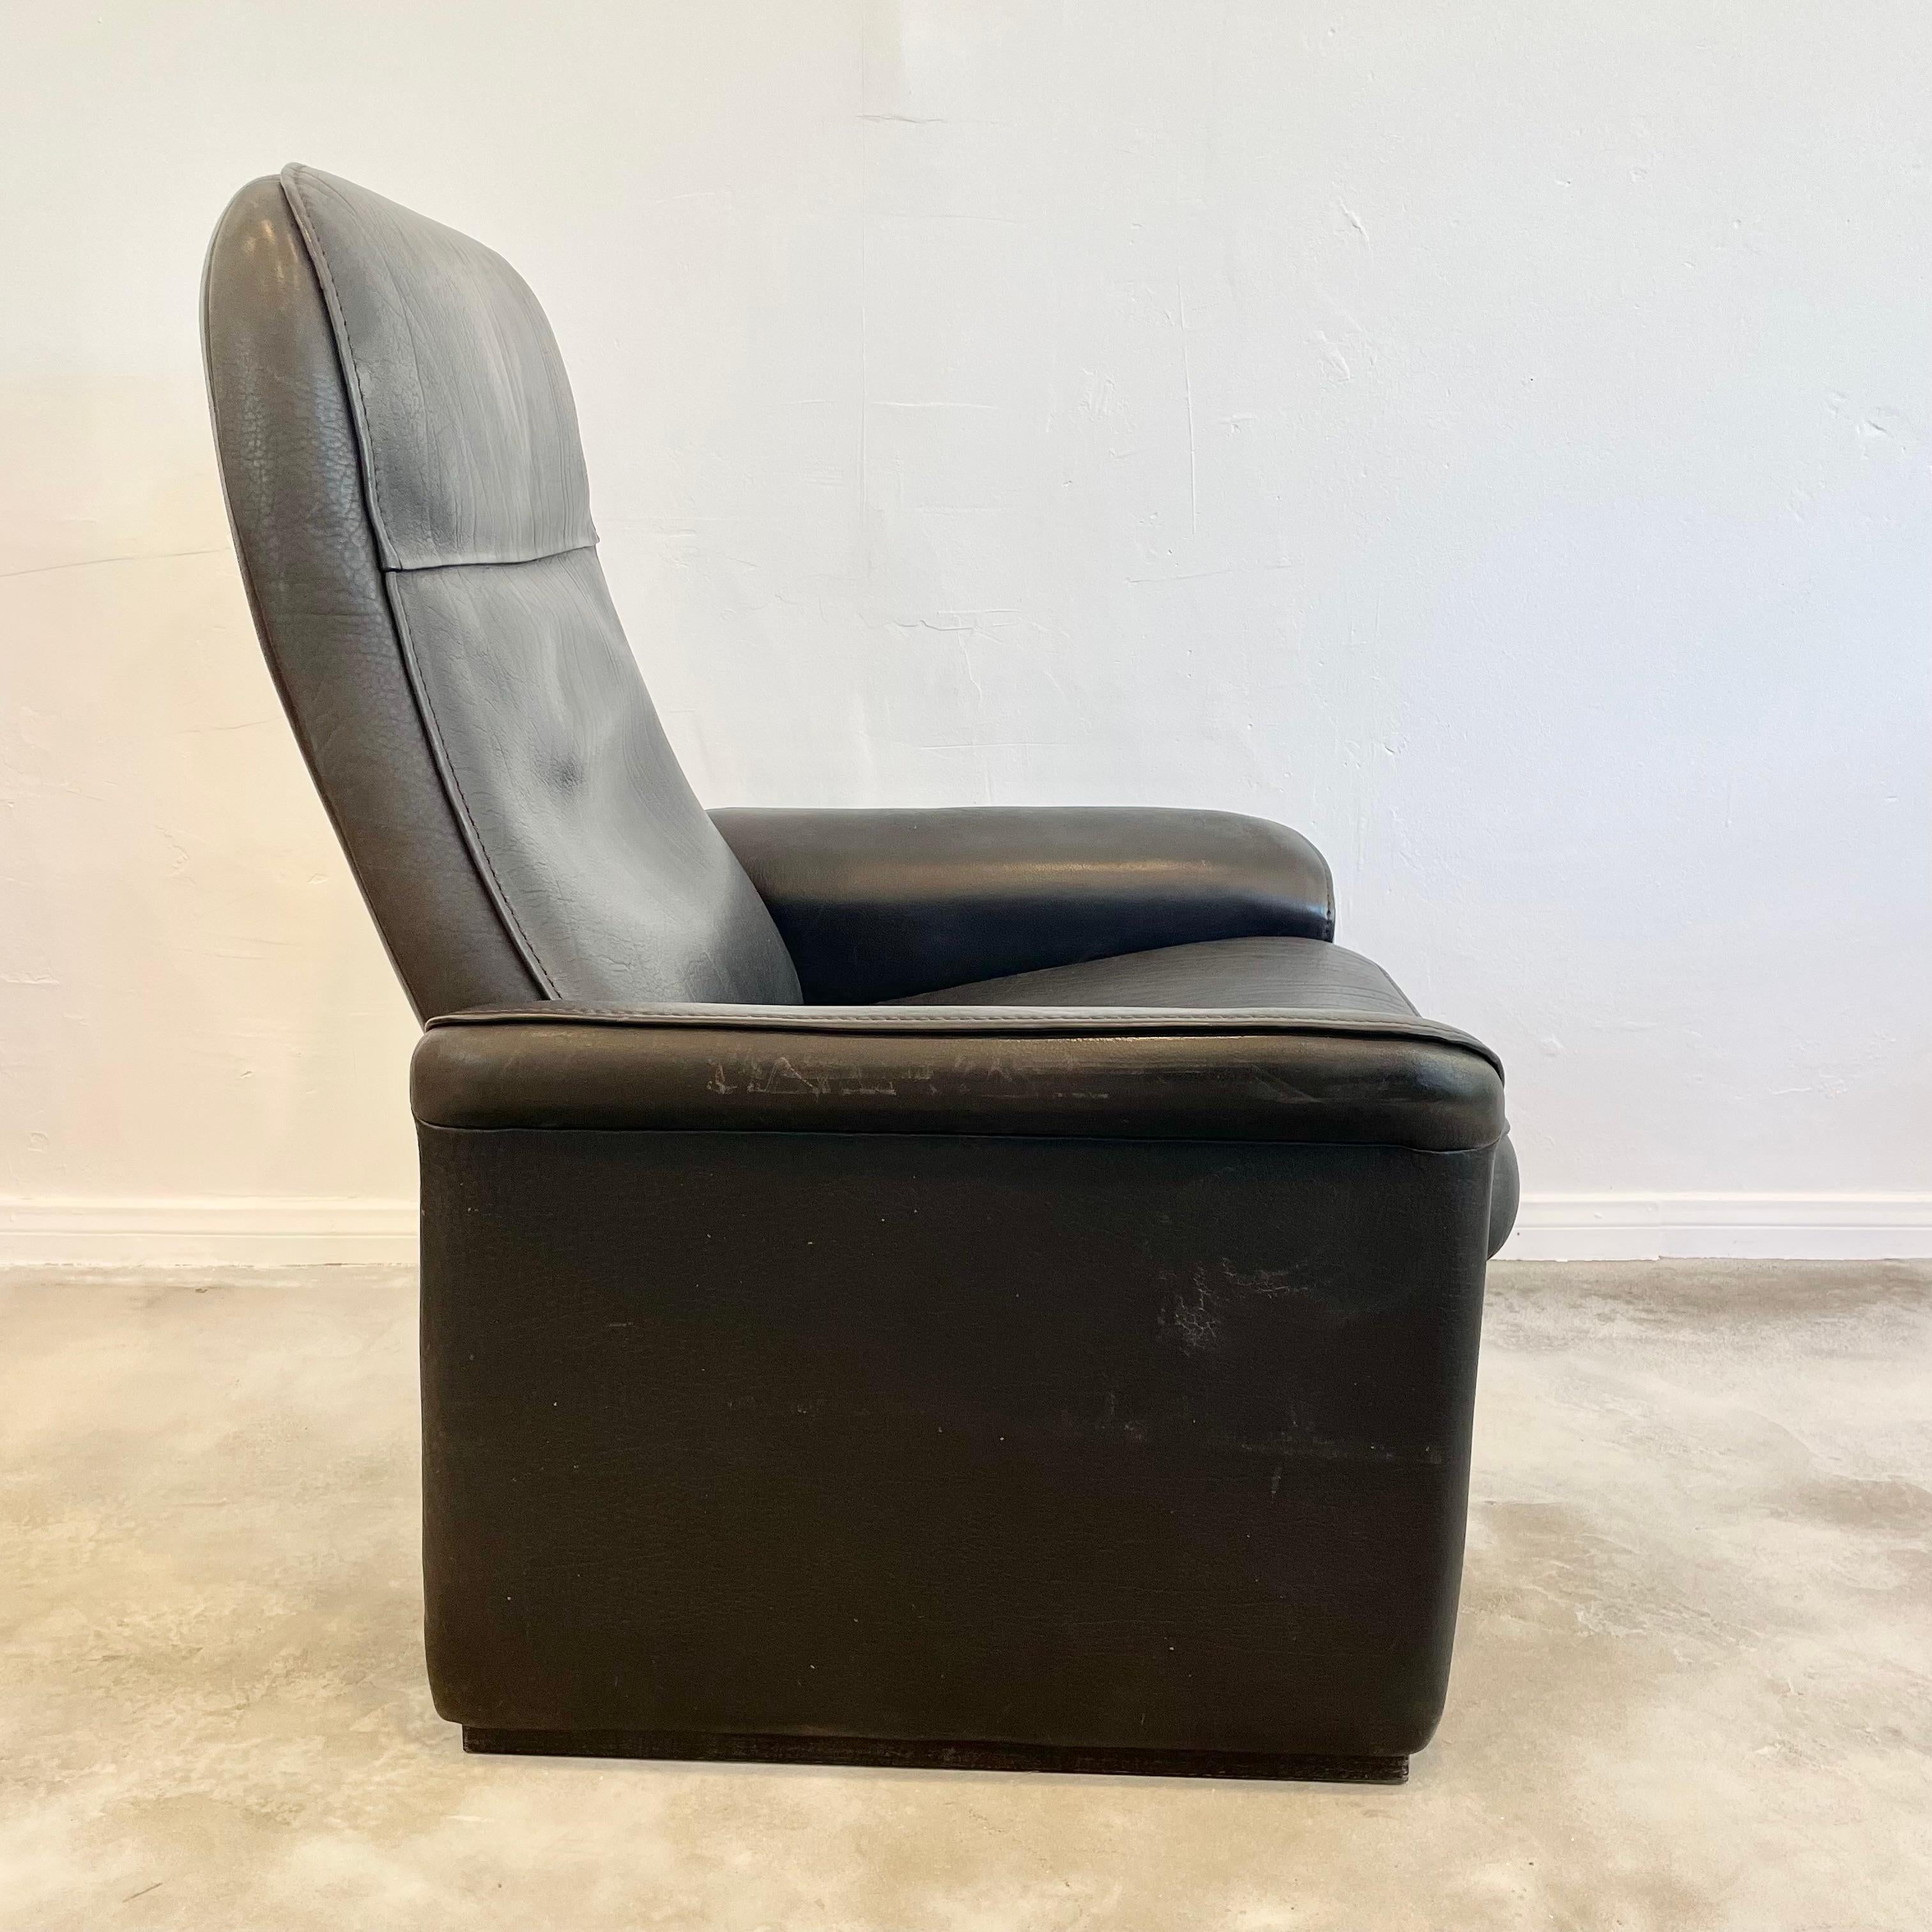 Pair of De Sede DS-50 Black Leather Recliner Chairs, 1970s Switzerland For Sale 6